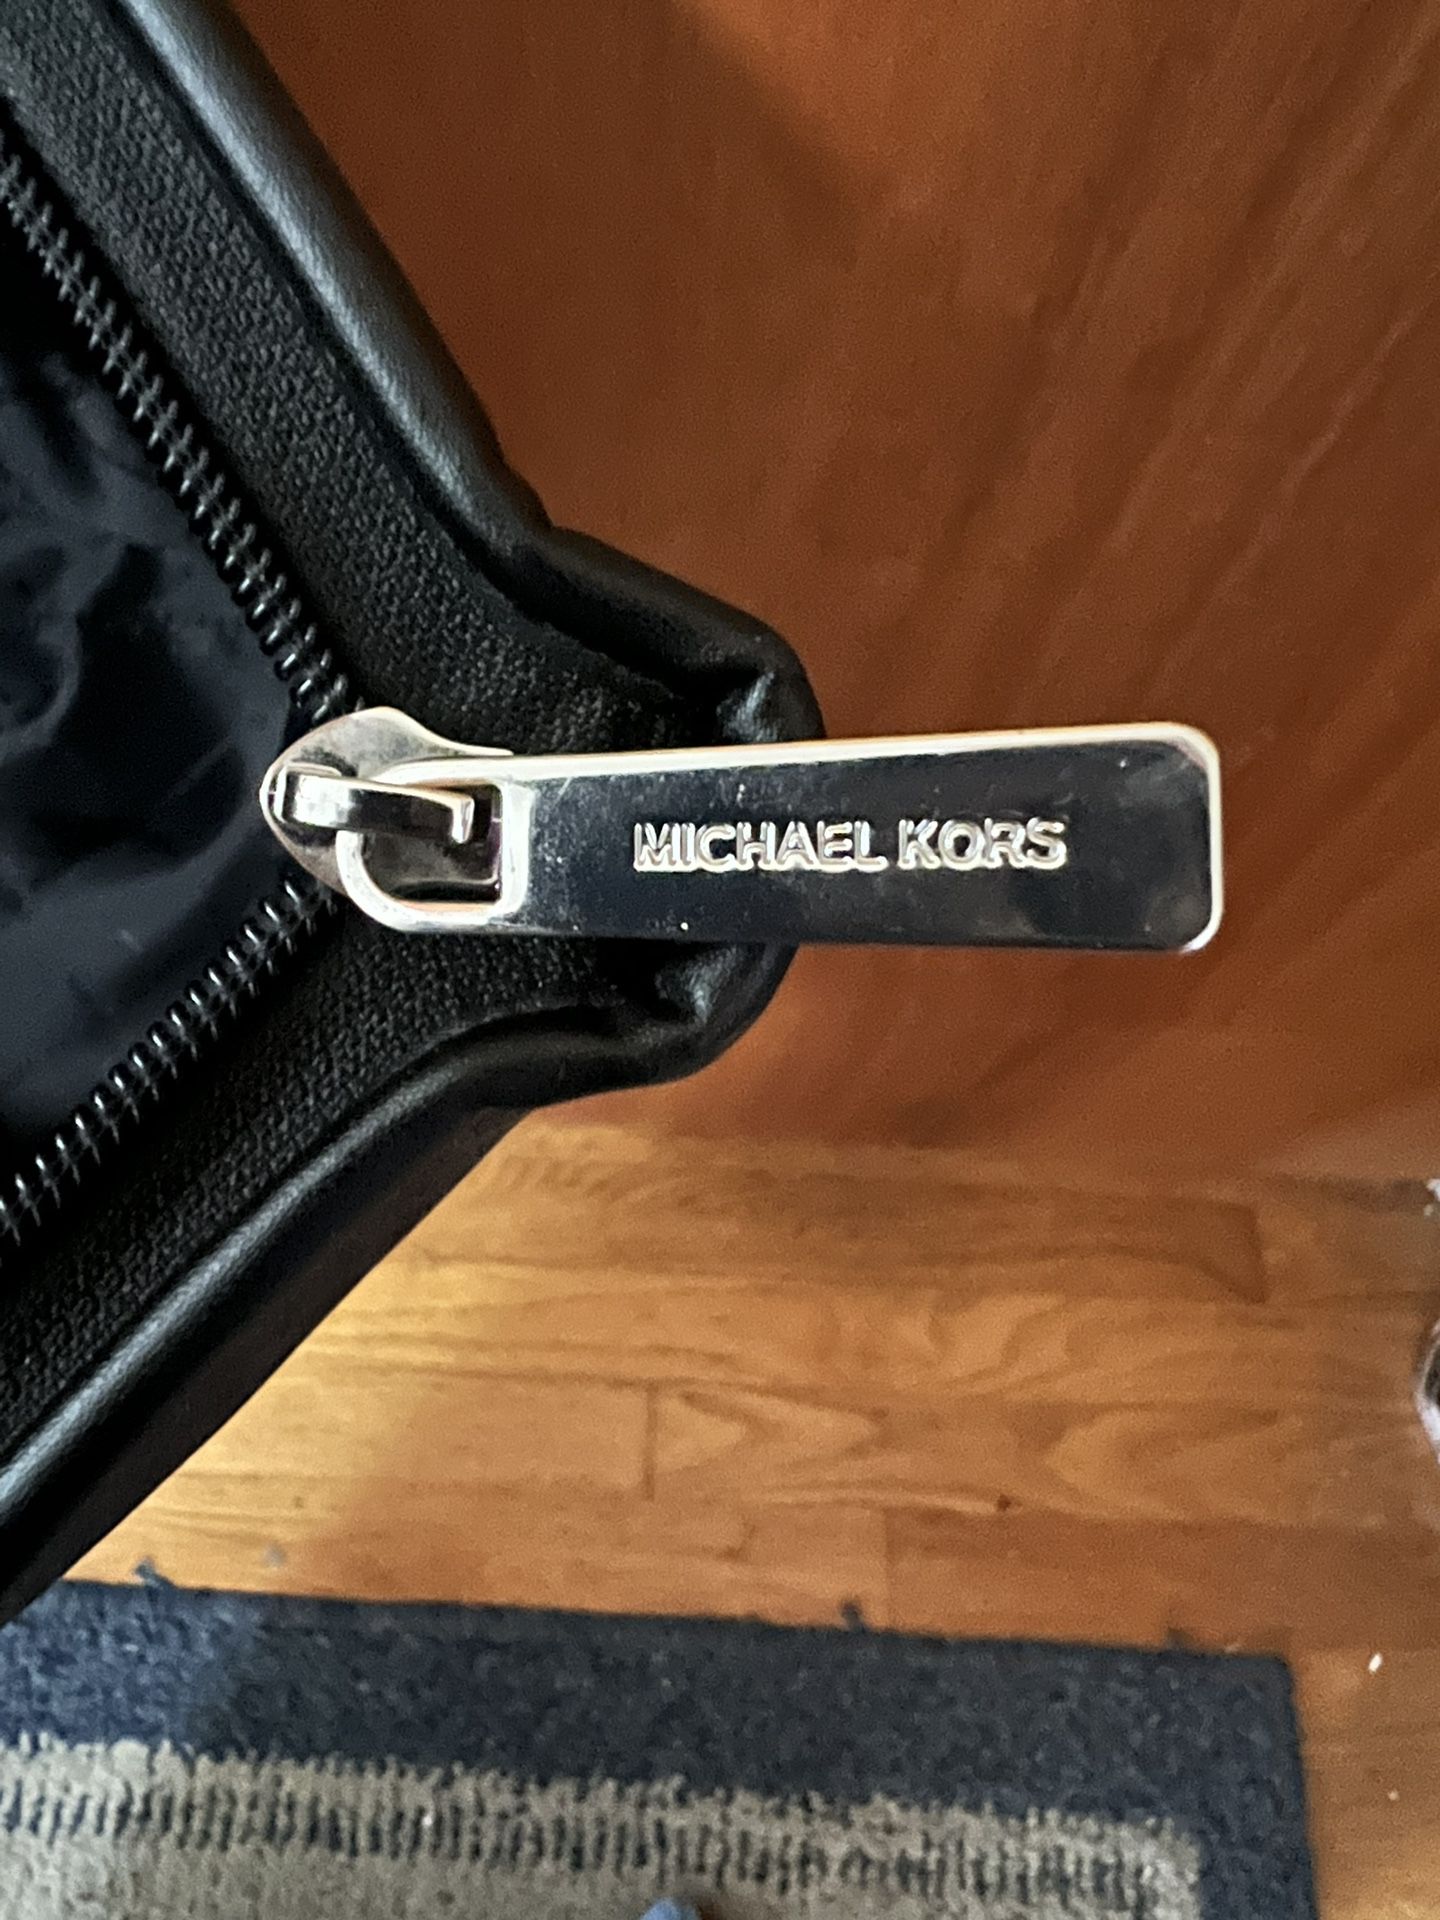 Michael Kors Tote for Sale in Uniondale, NY - OfferUp